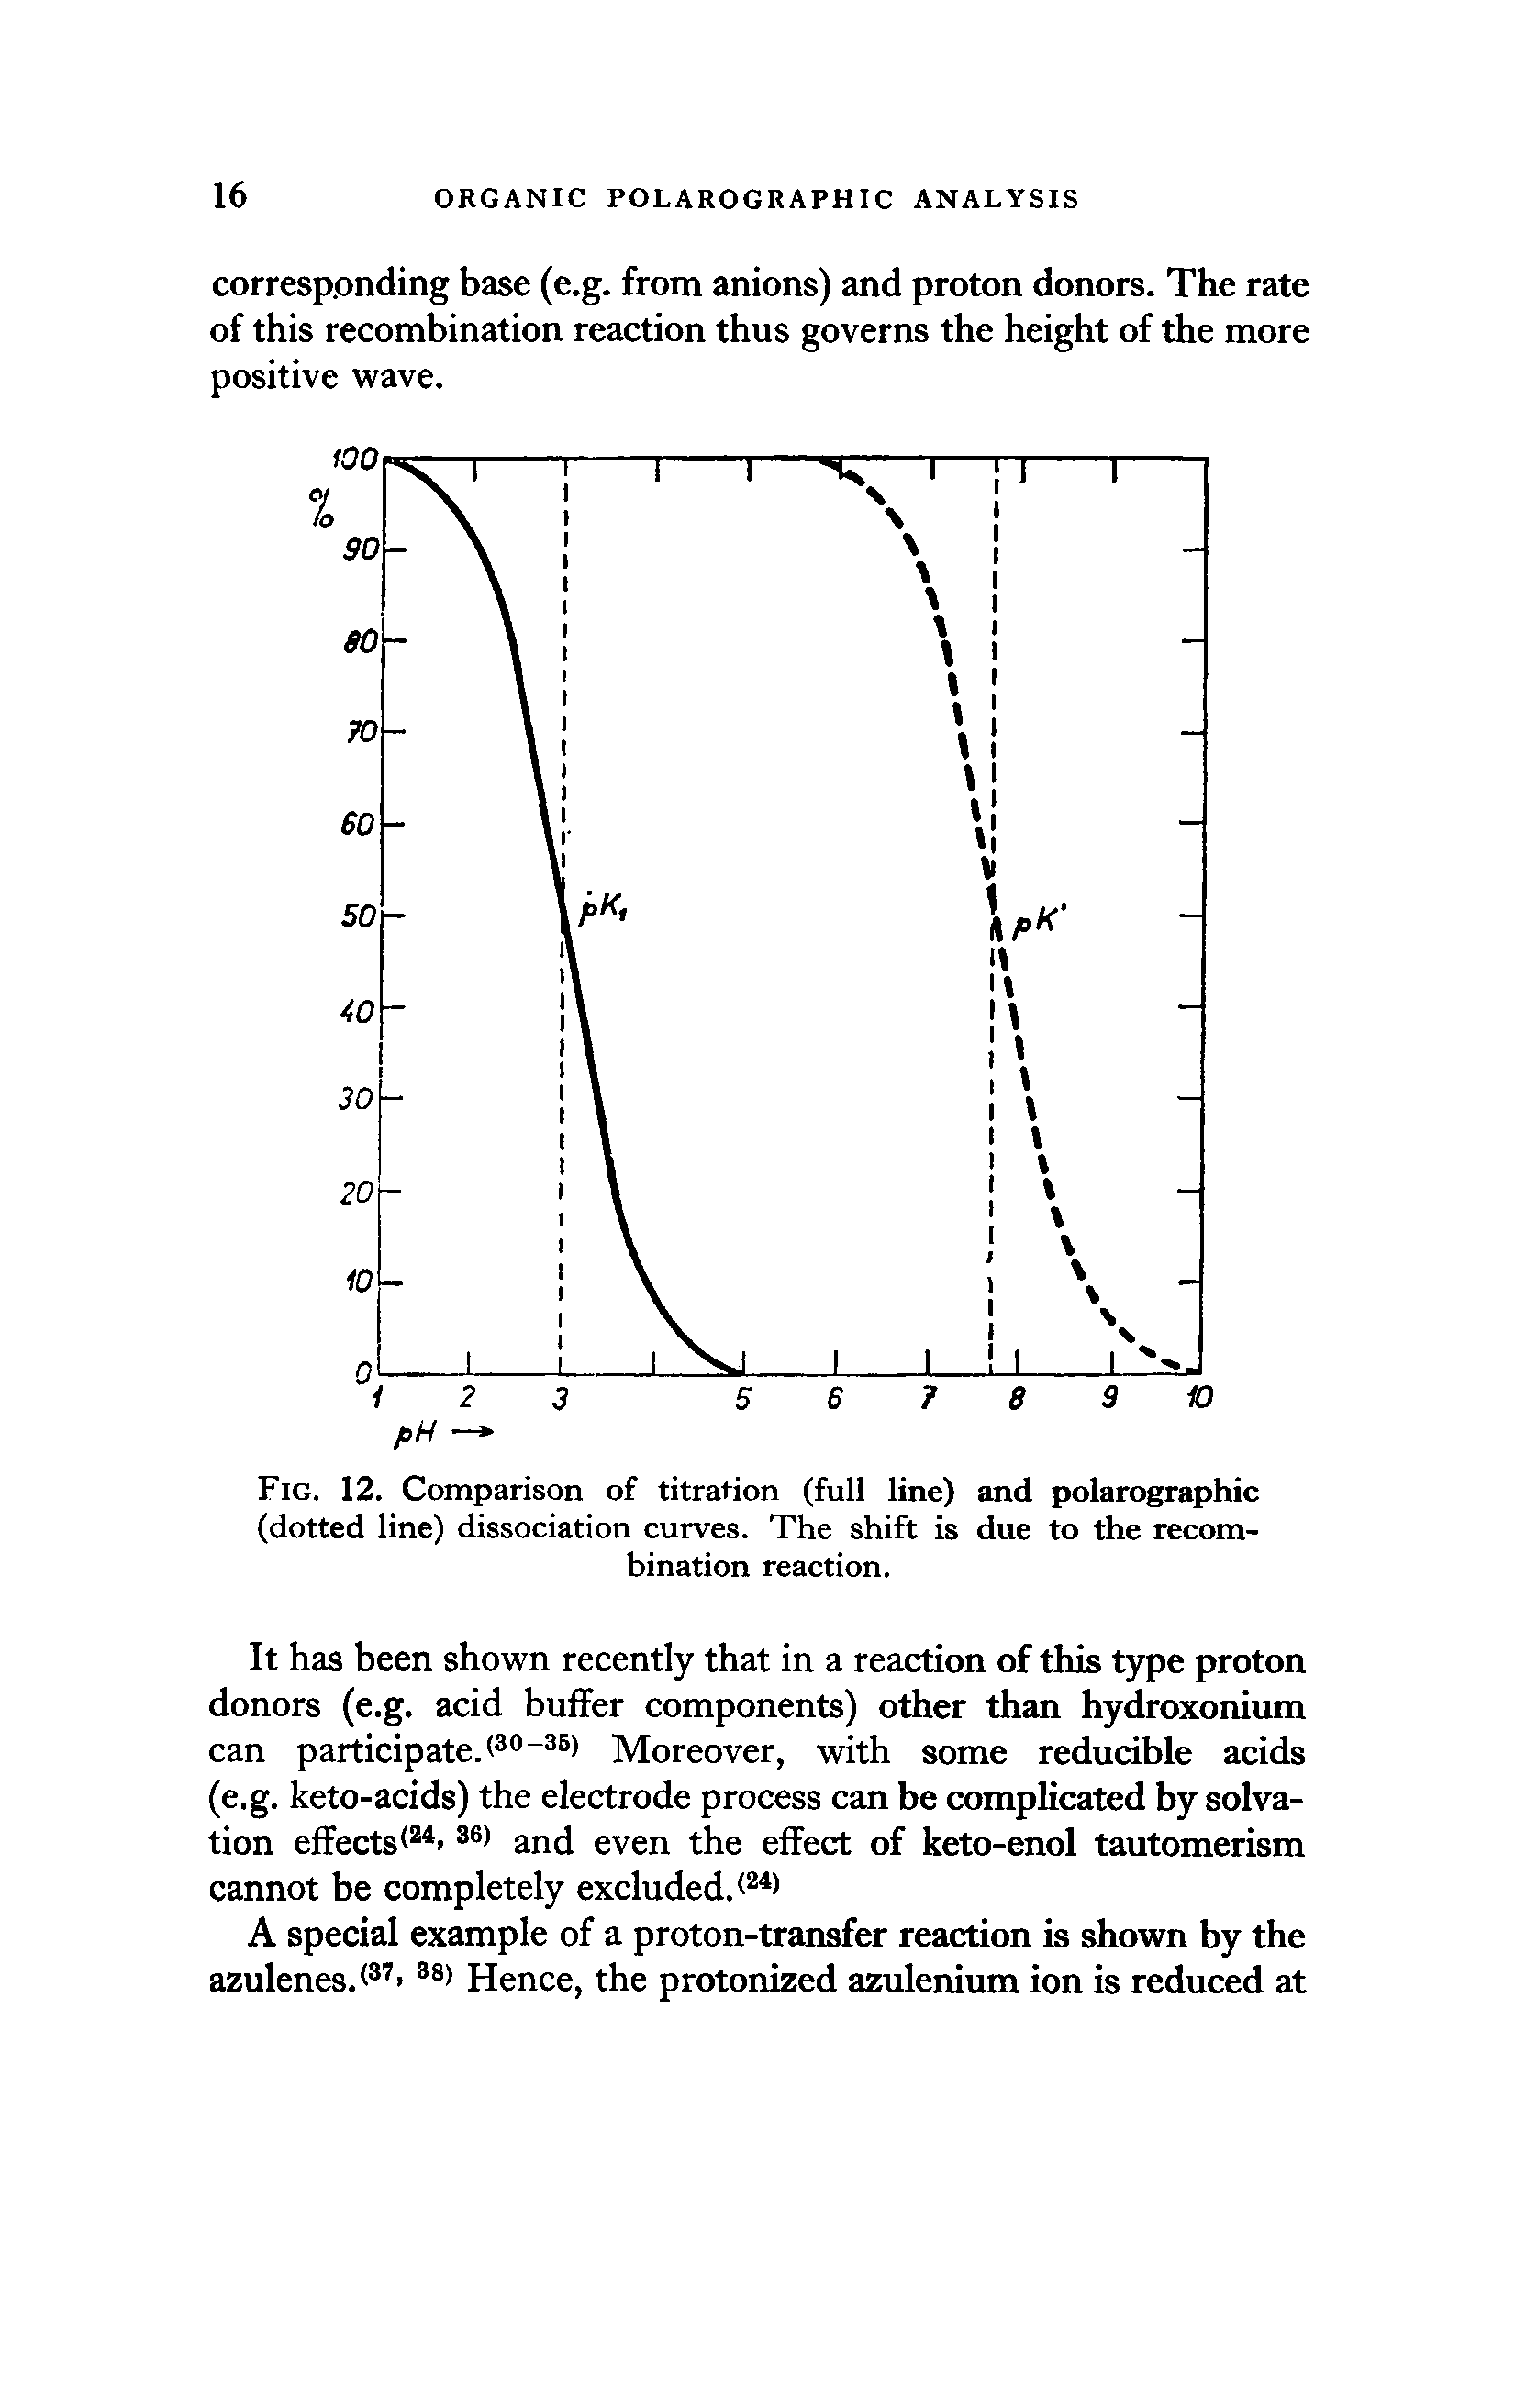 Fig. 12. Comparison of titration (full line) and polarographic (dotted line) dissociation curves. The shift is due to the recombination reaction.